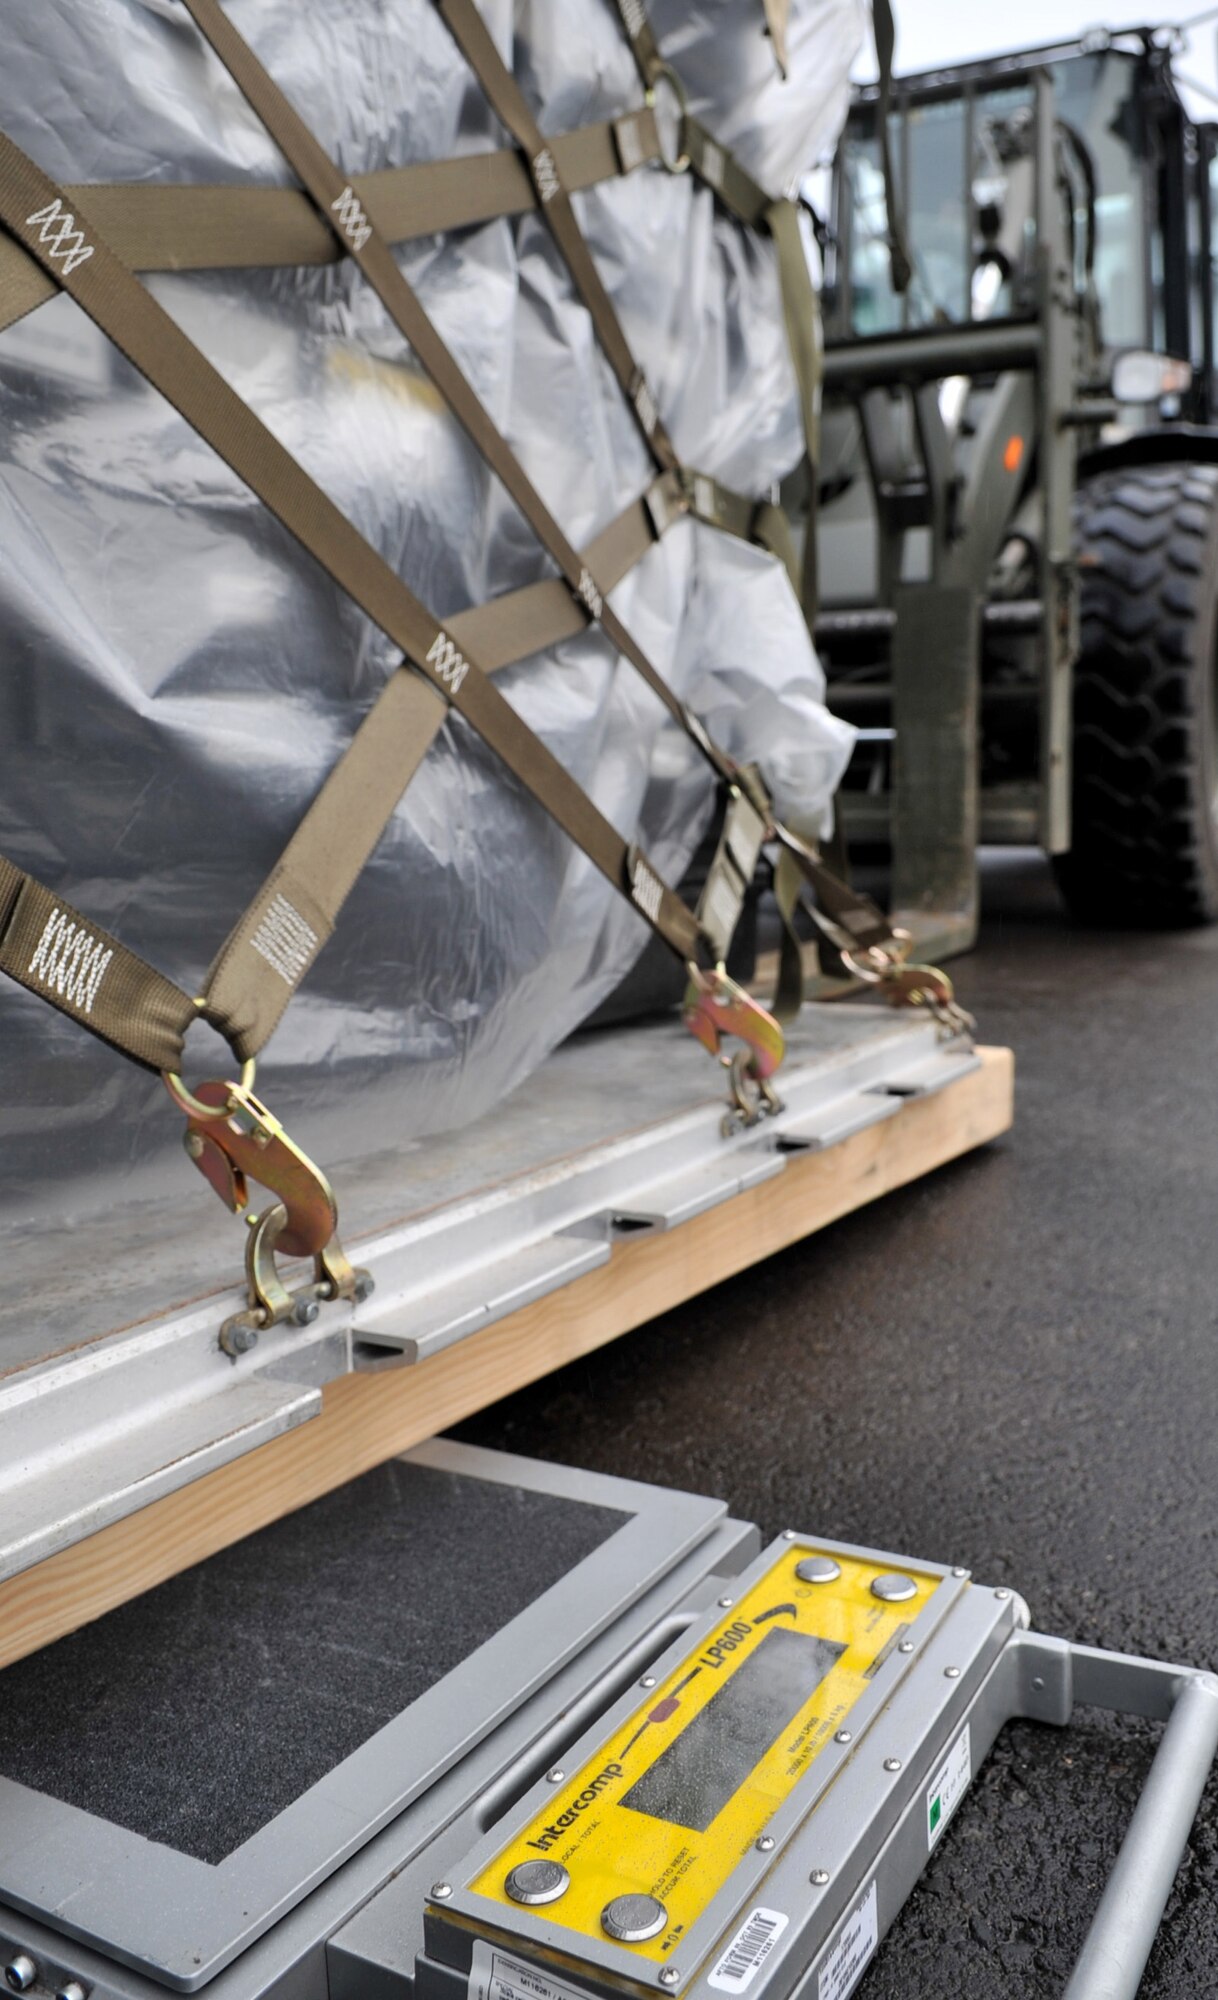 The 86th Logistics Readiness Squadron combat readiness section, weighs cargo during an in-check for a mission in support of Operation Unified Protector, Ramstein Air Base, Germany, April 1, 2011. Unified Protector is a NATO-led operation in Libya to protect civilians and civilian-populated areas under threat of attack. (U.S. Air Force photo by Senior Airman Caleb Pierce)